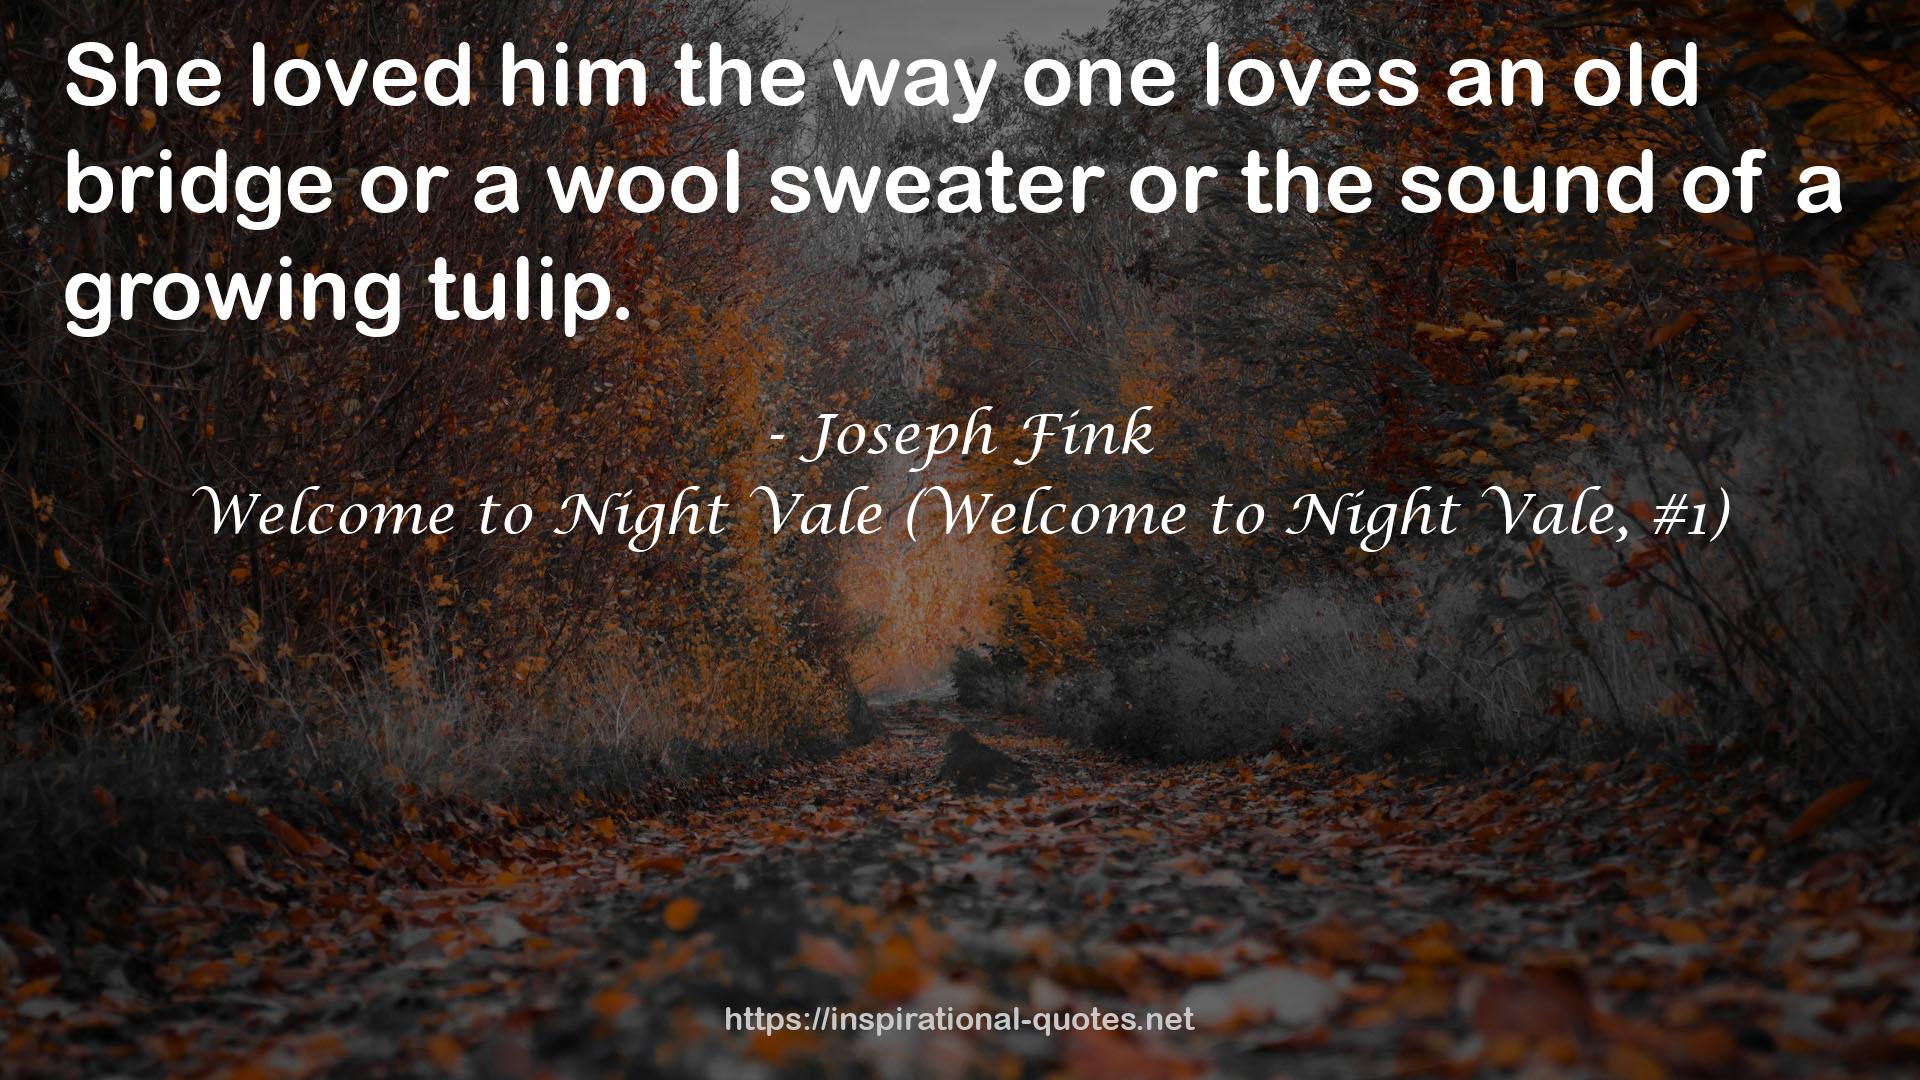 a wool sweater  QUOTES